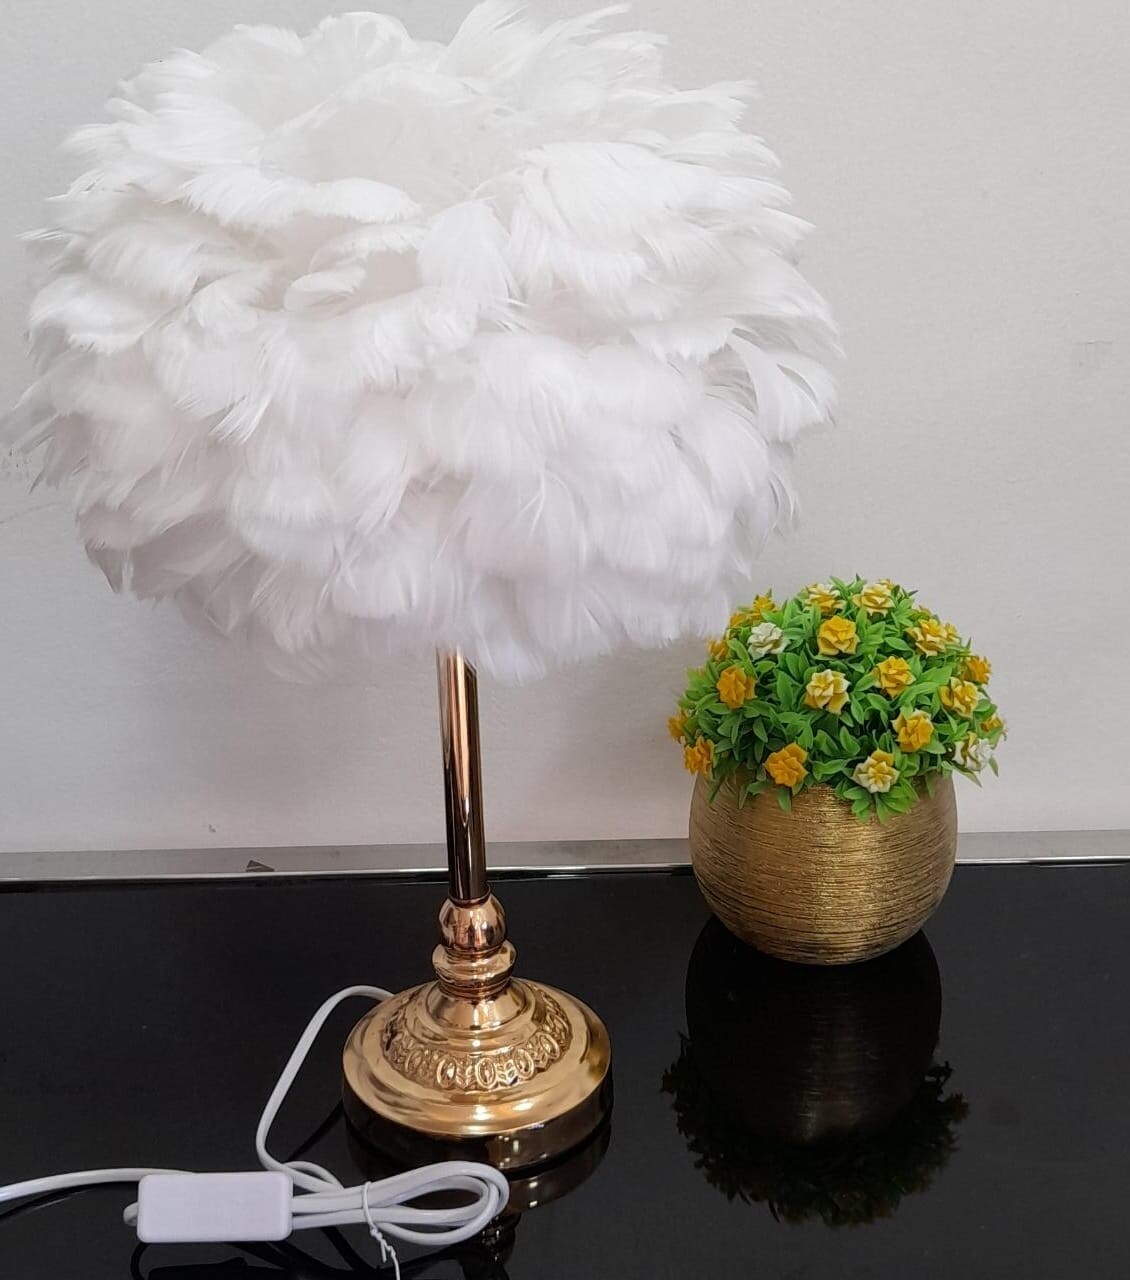 Generic L.E.D Bedside Table Feather Lamp decorative Lamp White one leg. In a gift box